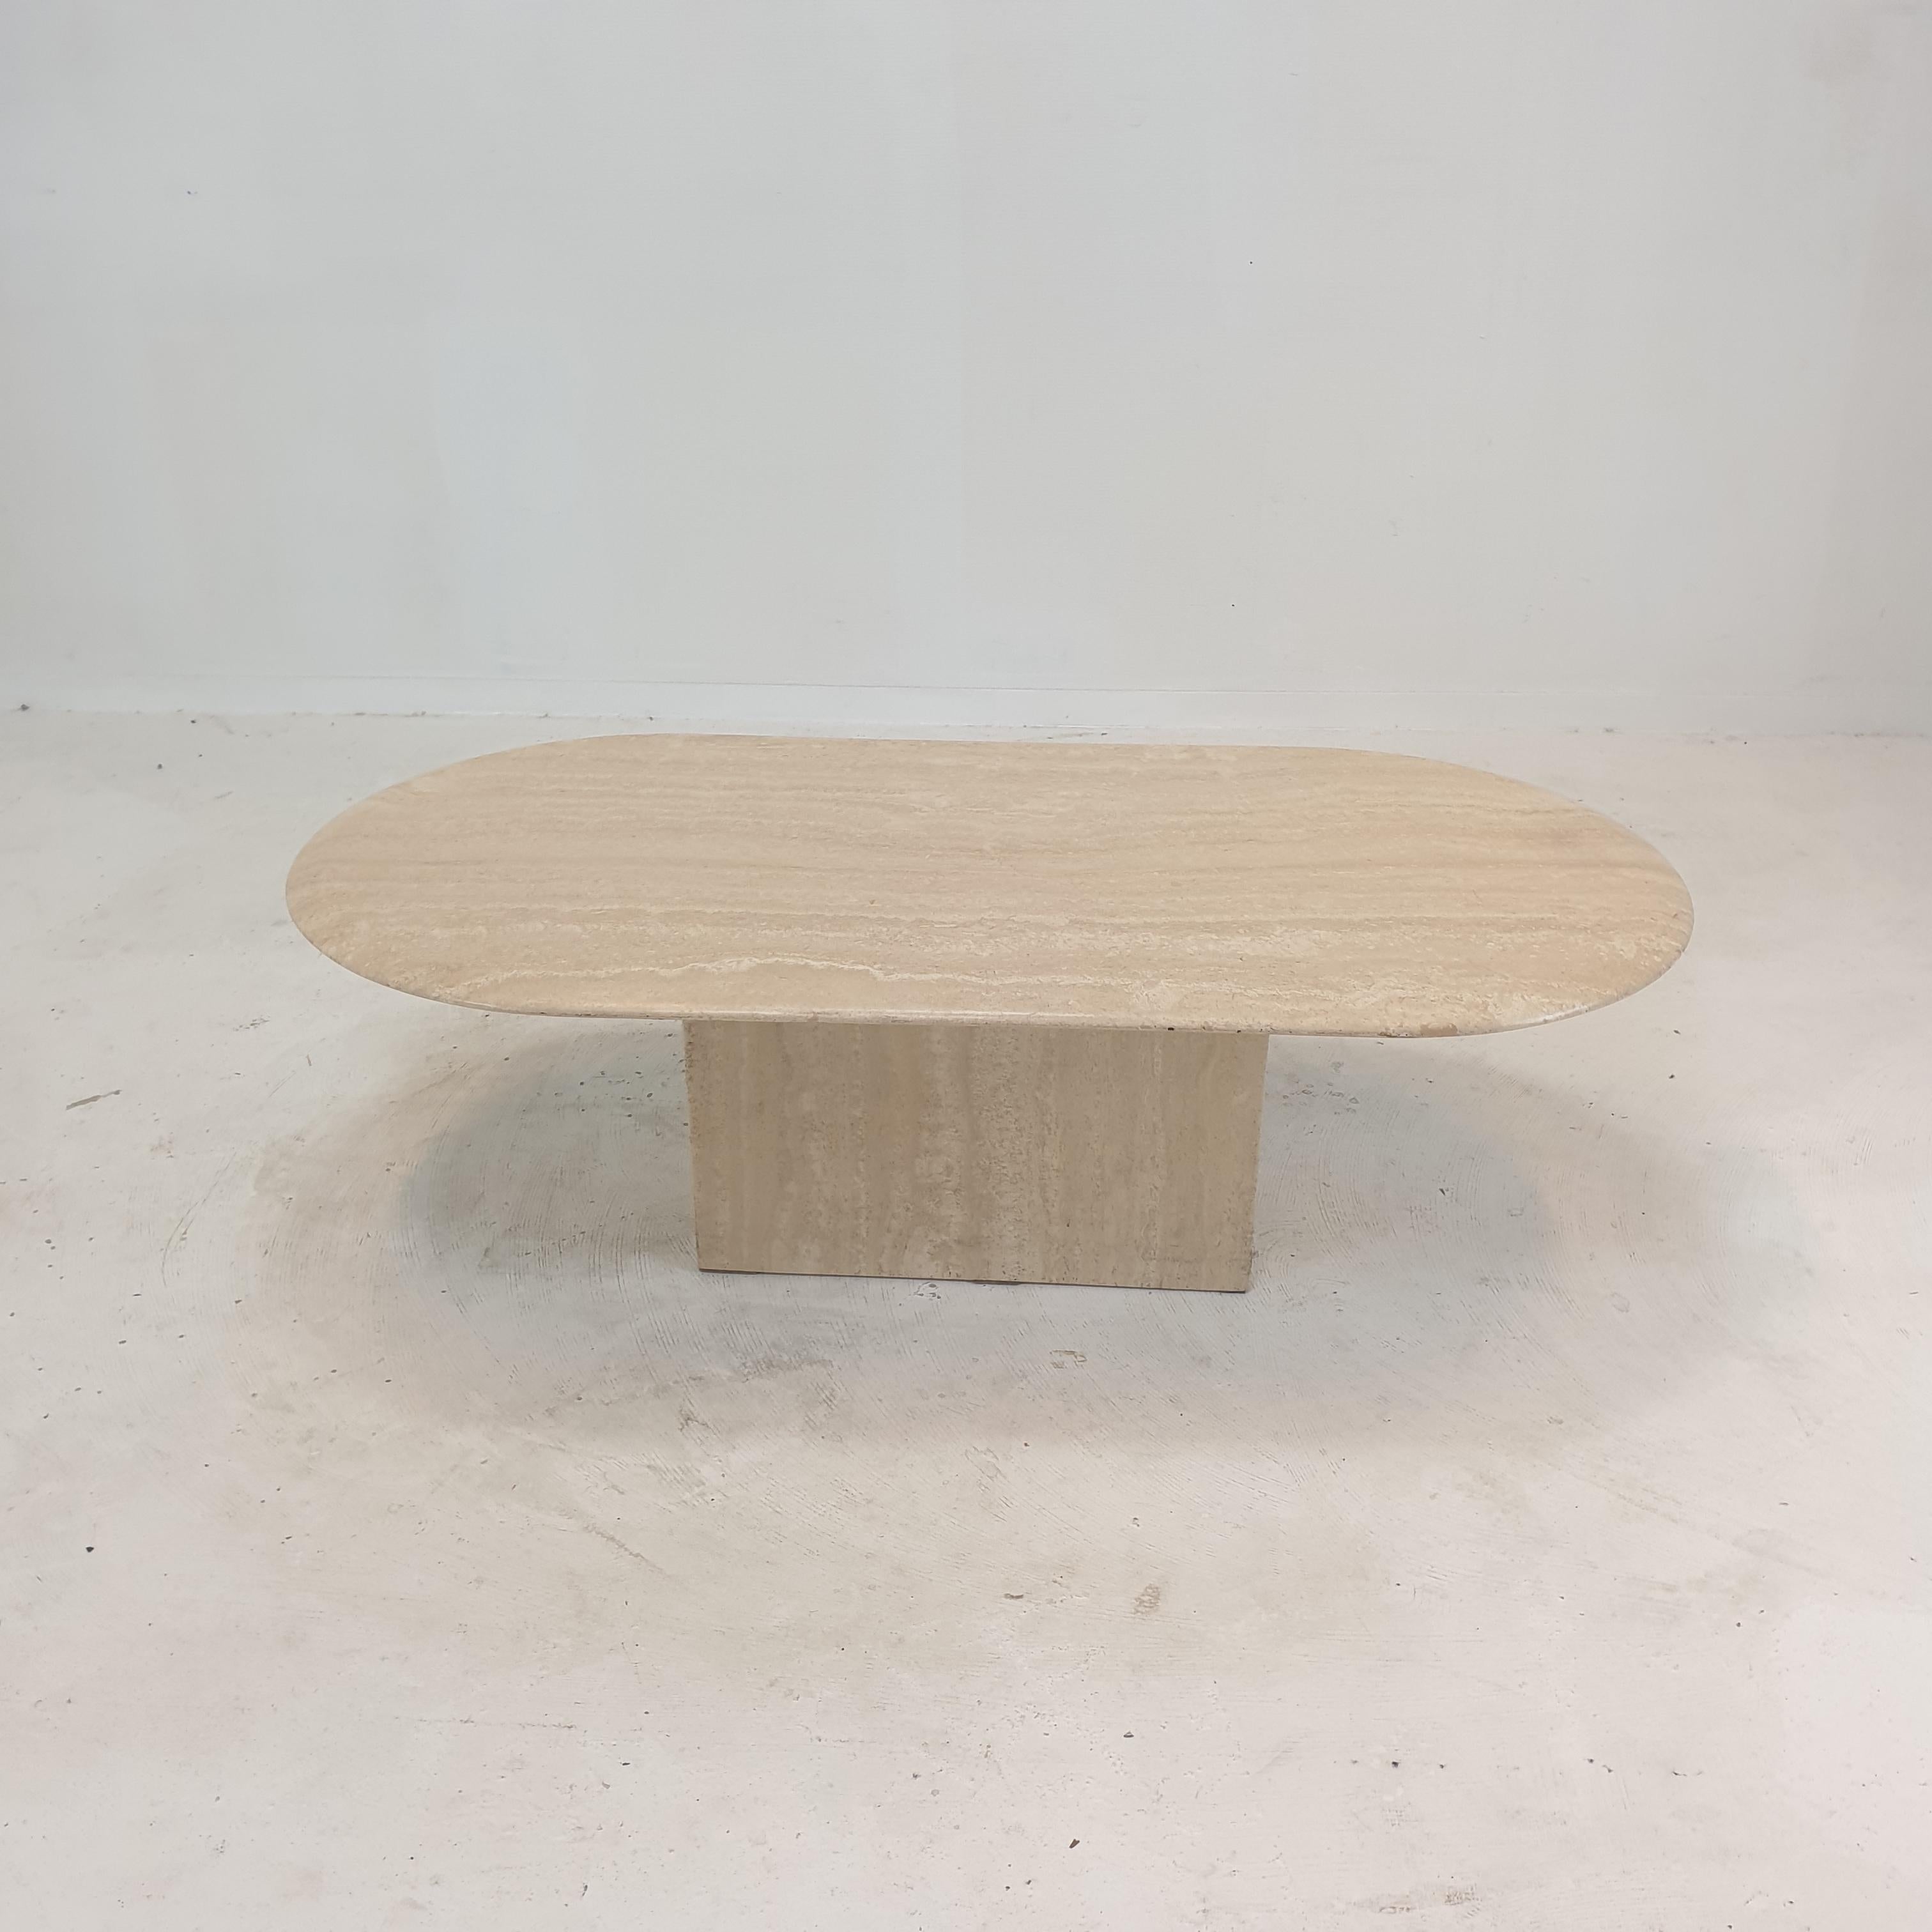 Hand-Crafted Italian Oval Coffee Table in Travertine, 1980s For Sale